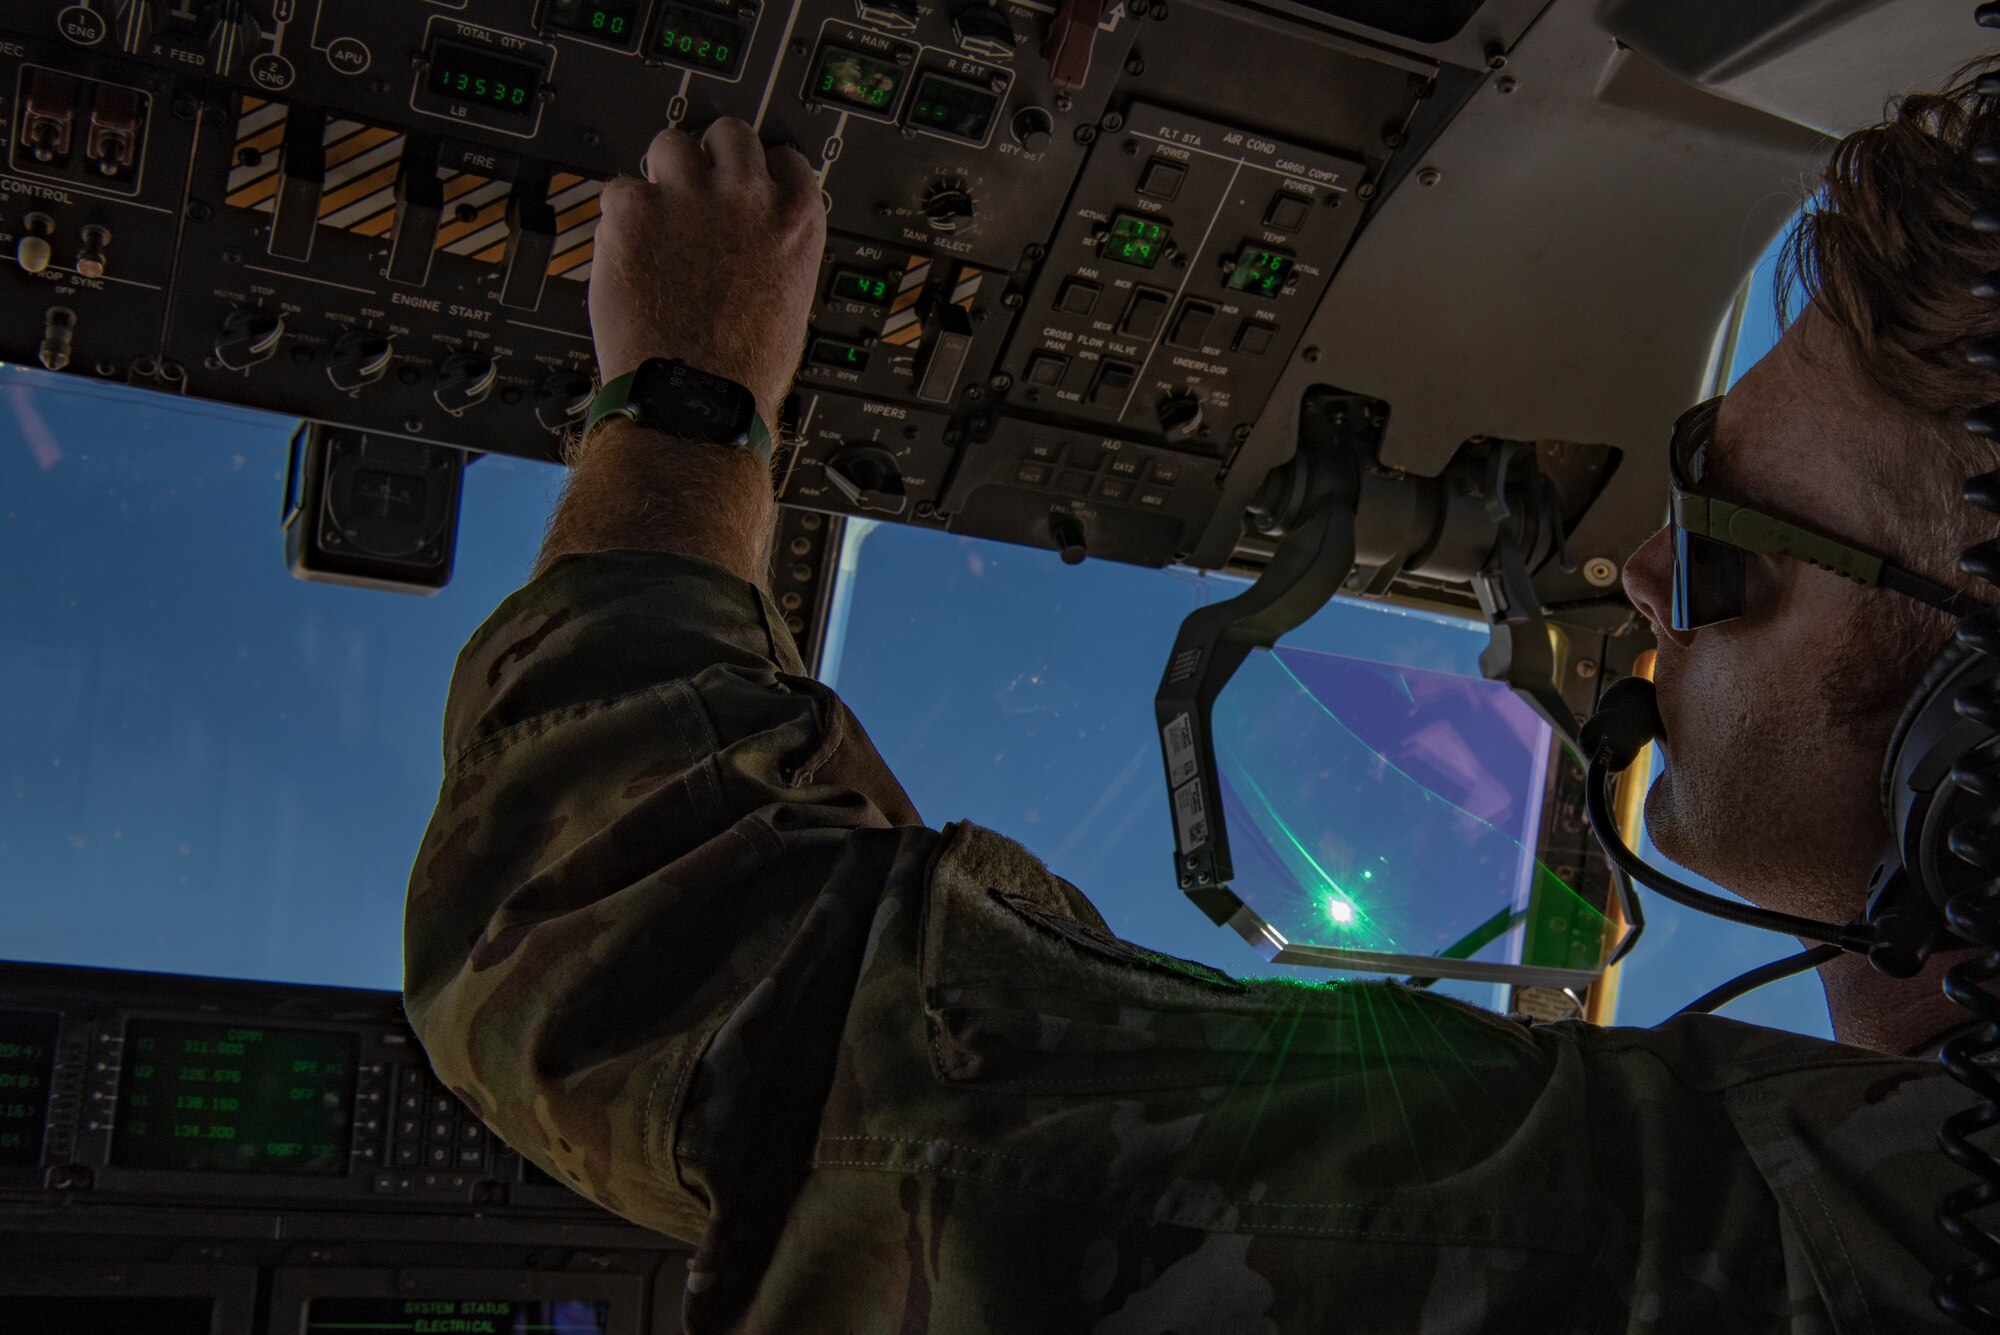 Capt. Sean Mishler, 40th Airlift Squadron pilot, adjusts the fuel tanks on a C-130J Super Hercules while flying over Texas, Aug. 29, 2022. During exercise Patriot Fury, Mishler and his aircrew loaded and offloaded heavy working equipment at Robert Gray Army Airfield, Fort Hood, Texas. (U.S. Air Force photo by Airman 1st Class Ryan Hayman)